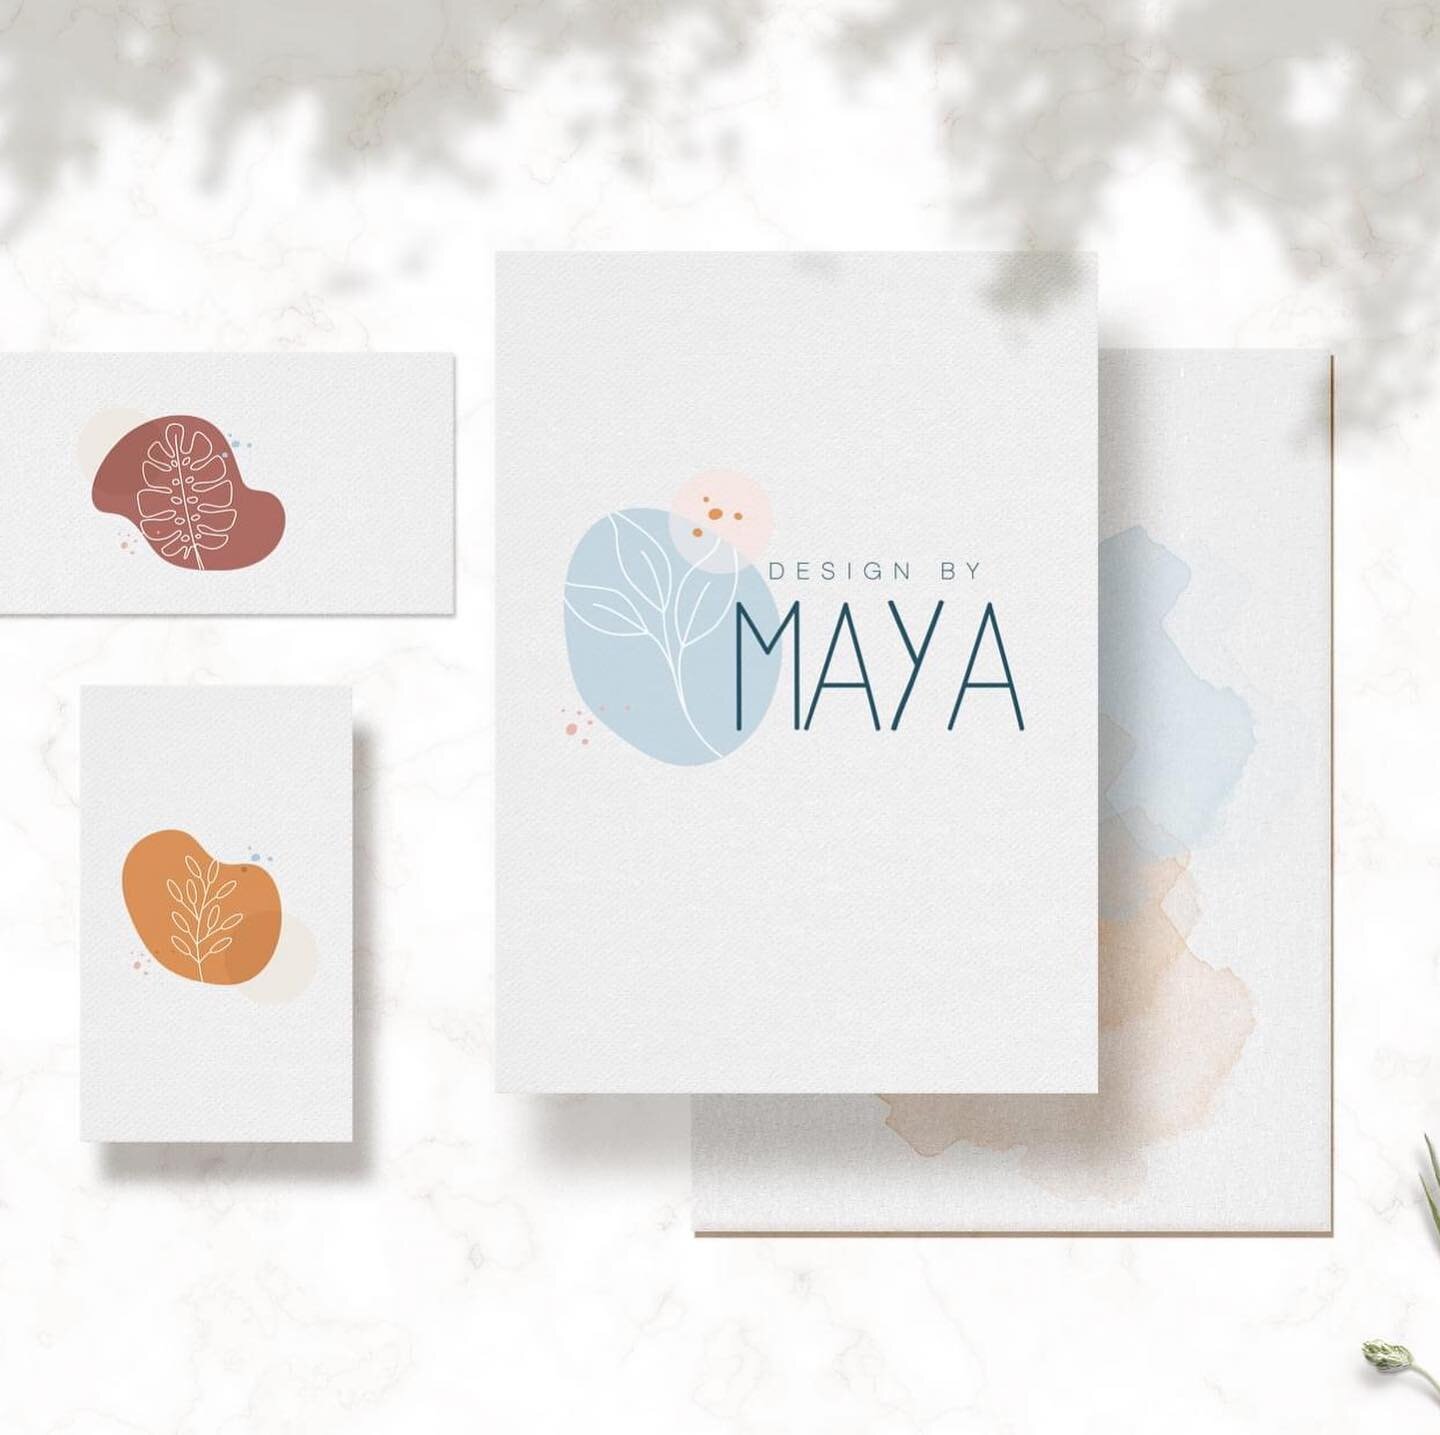 ✨ BRAND REVEAL! ✨ A brand identity for Design By Maya, a young local artist. Her logo is simple, modern and playful with a delicate botanical touch mirroring the young artist's earthy natural art style. The supporting graphic icons compliment her log